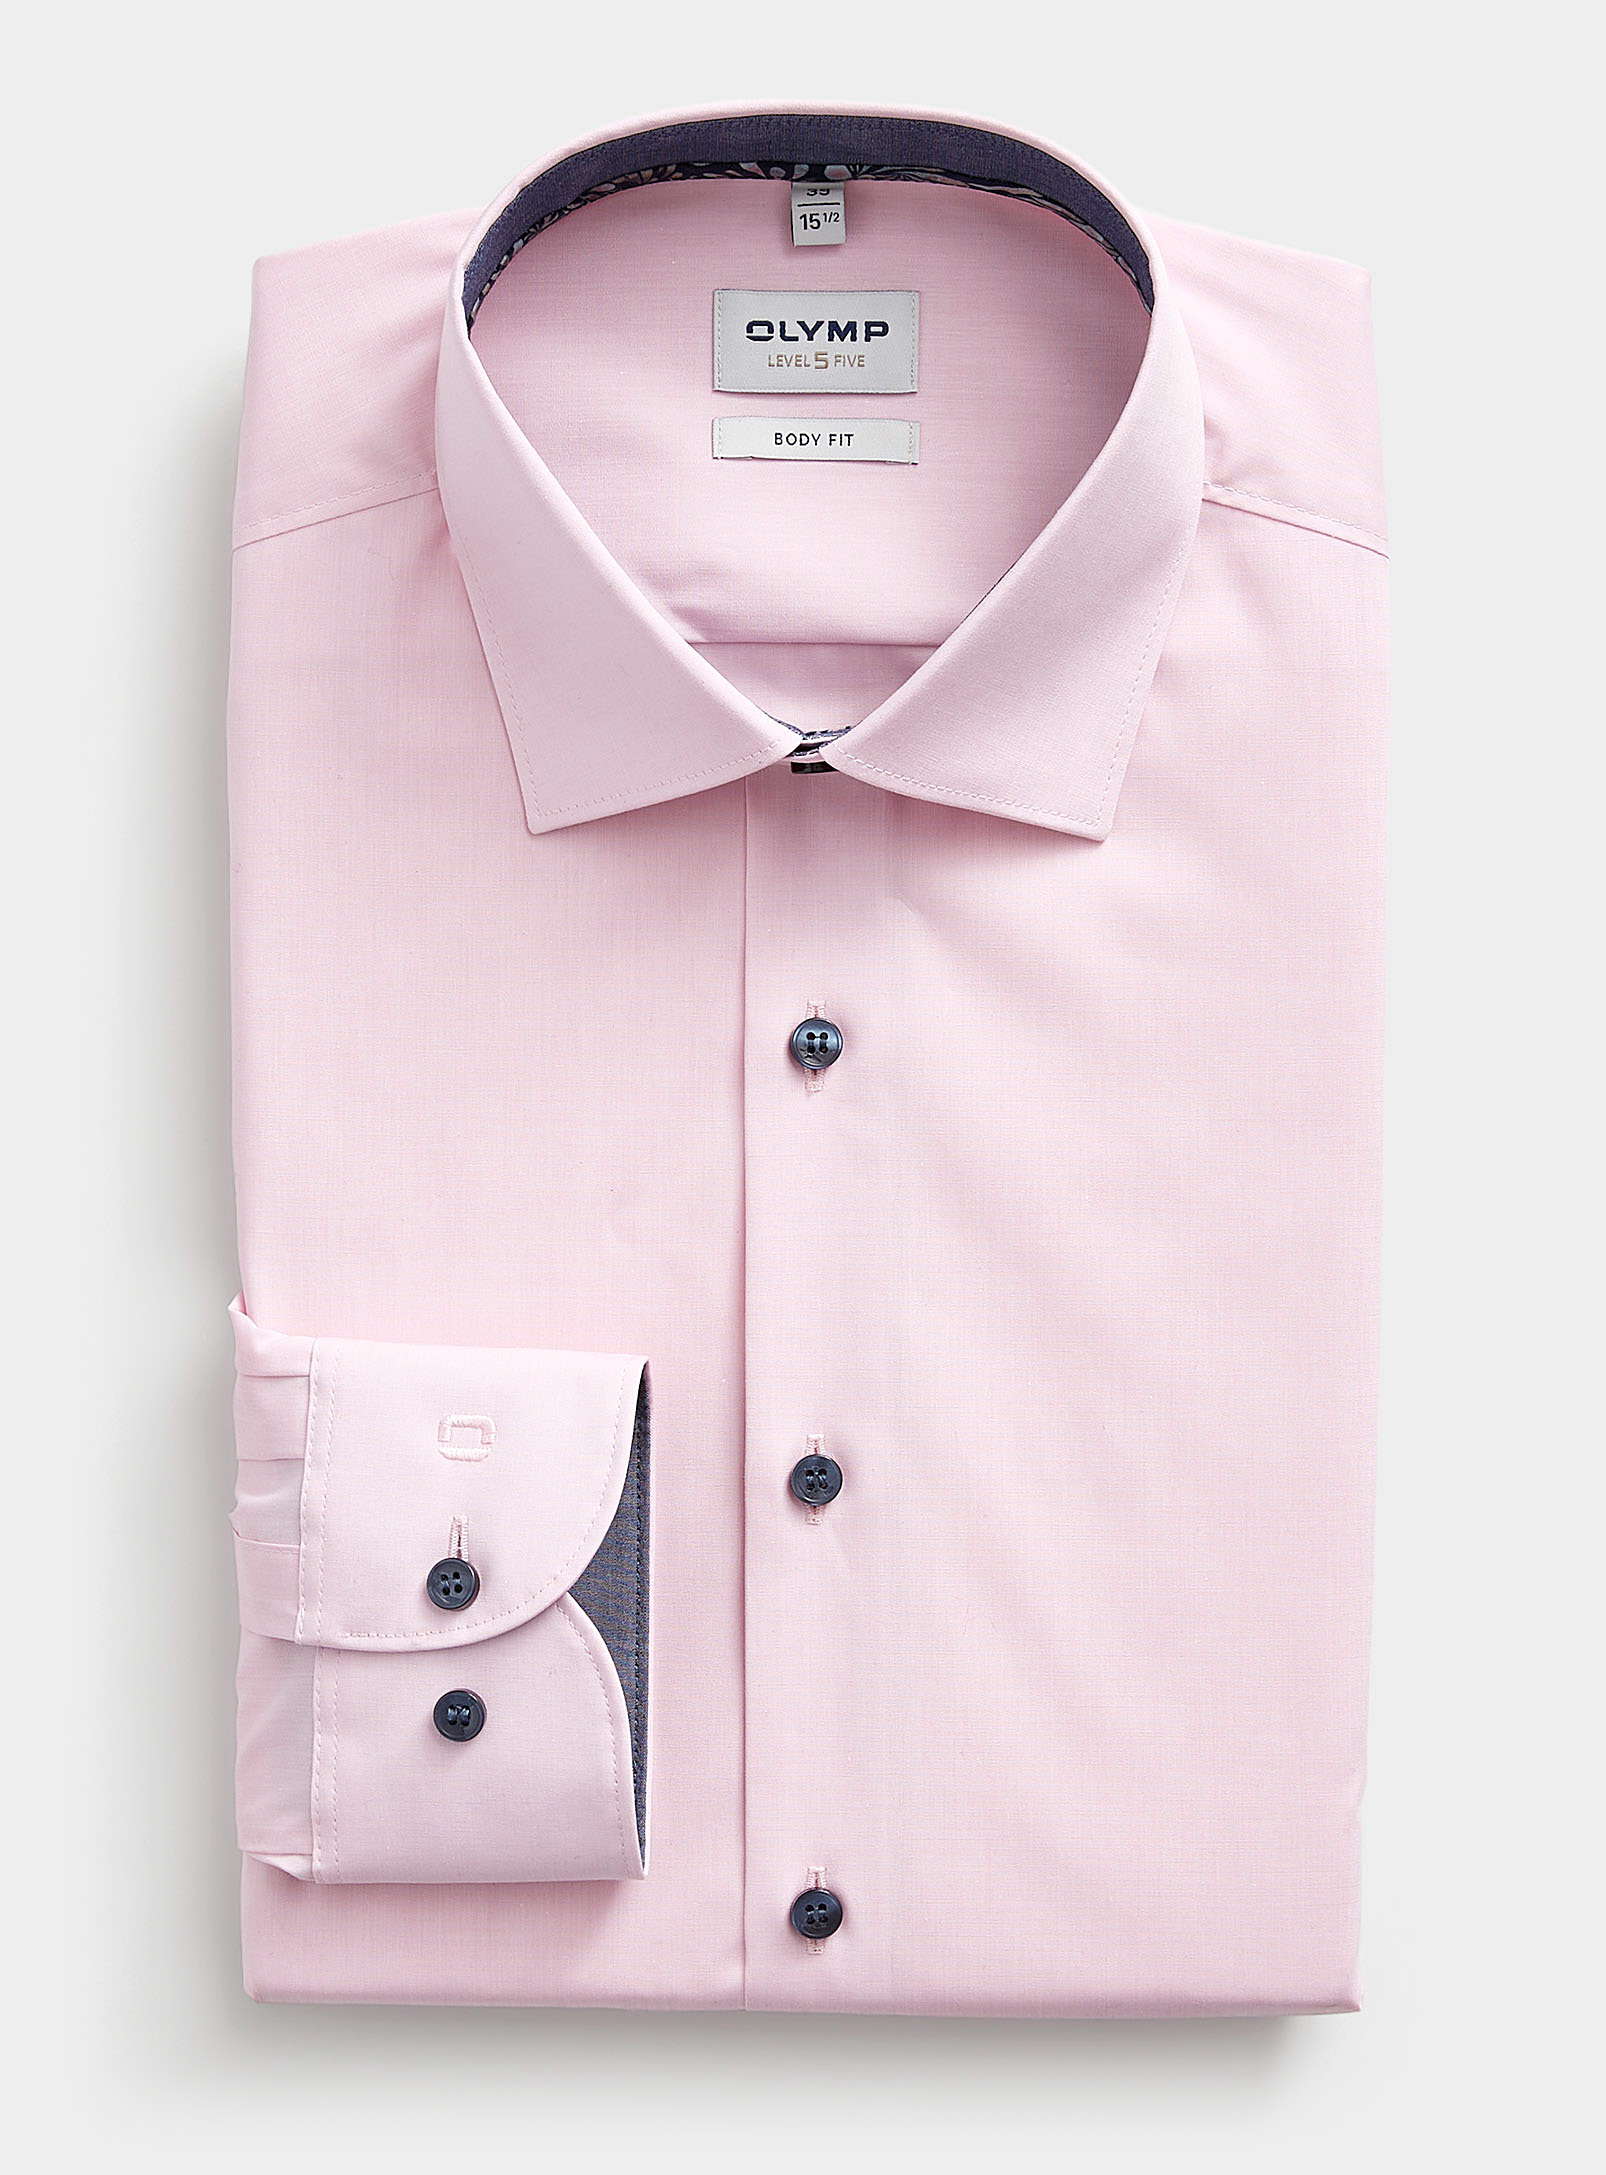 Olymp Contrast Underside Colourful Shirt Modern Fit In Pink